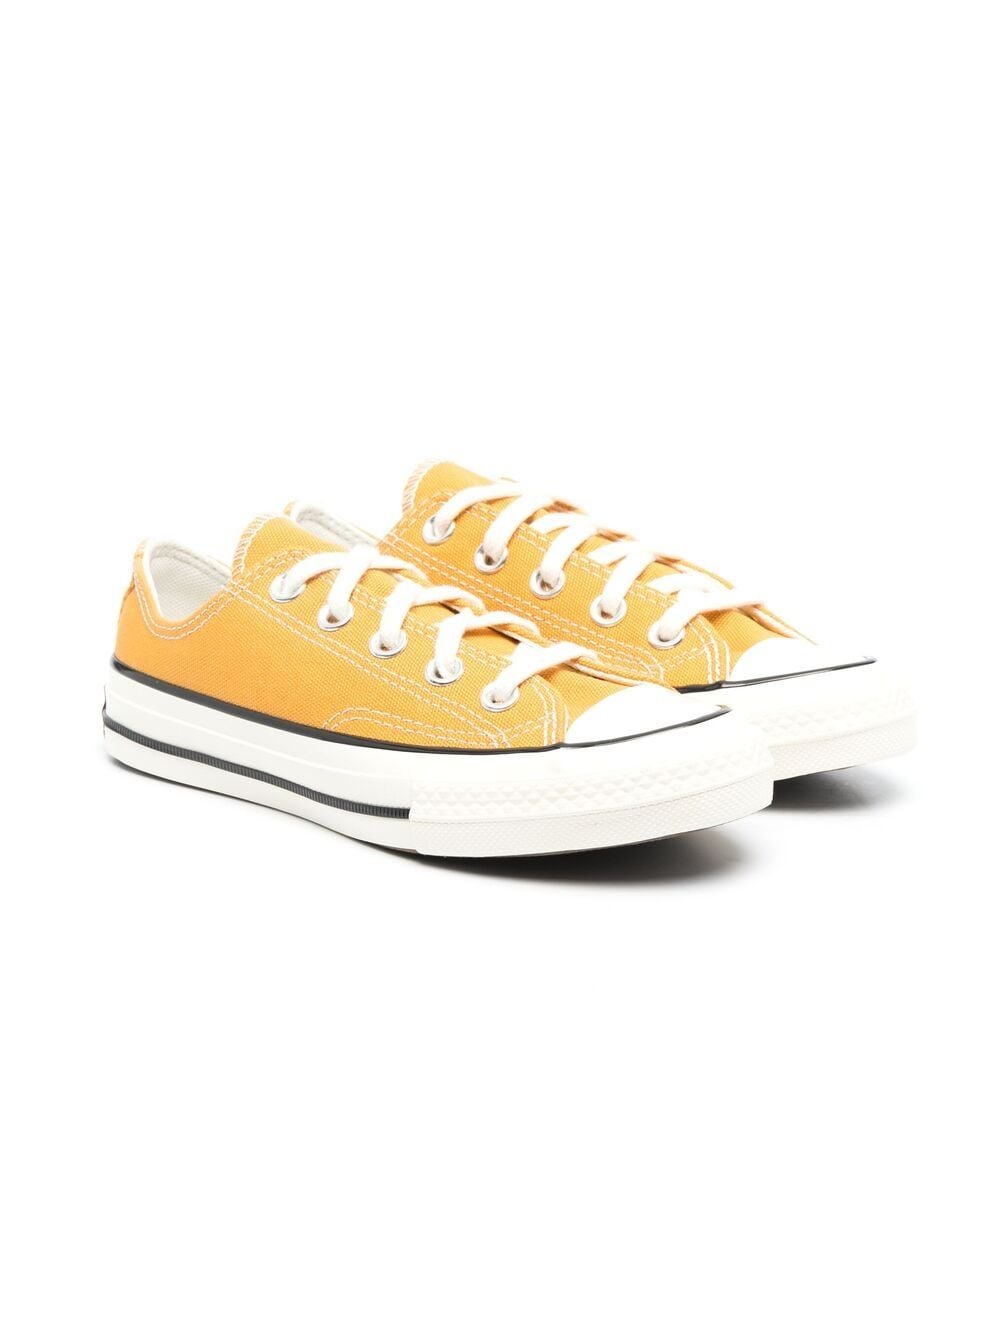 Converse Chuck Taylor All Star Sneakers In Yellow